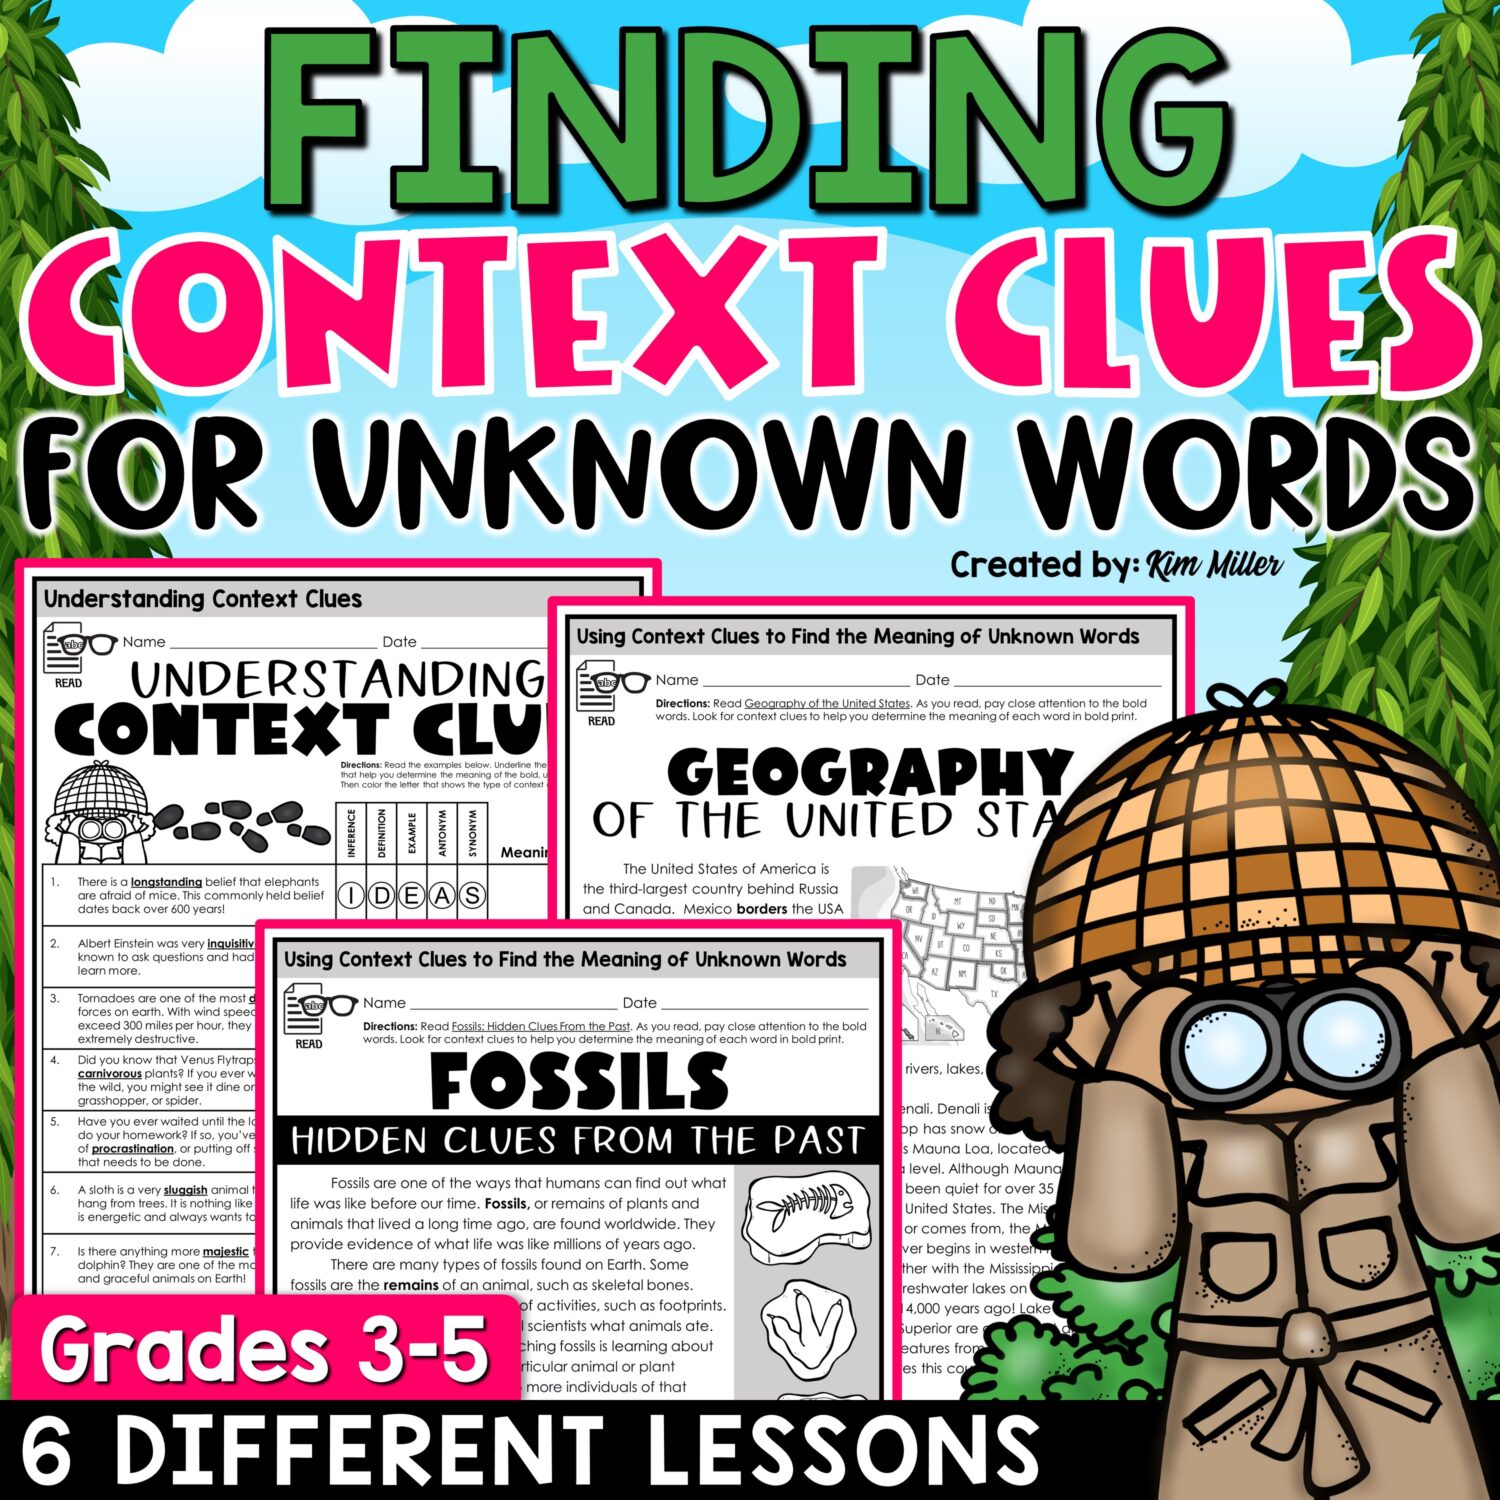 Finding Context Clues for Unknown Words